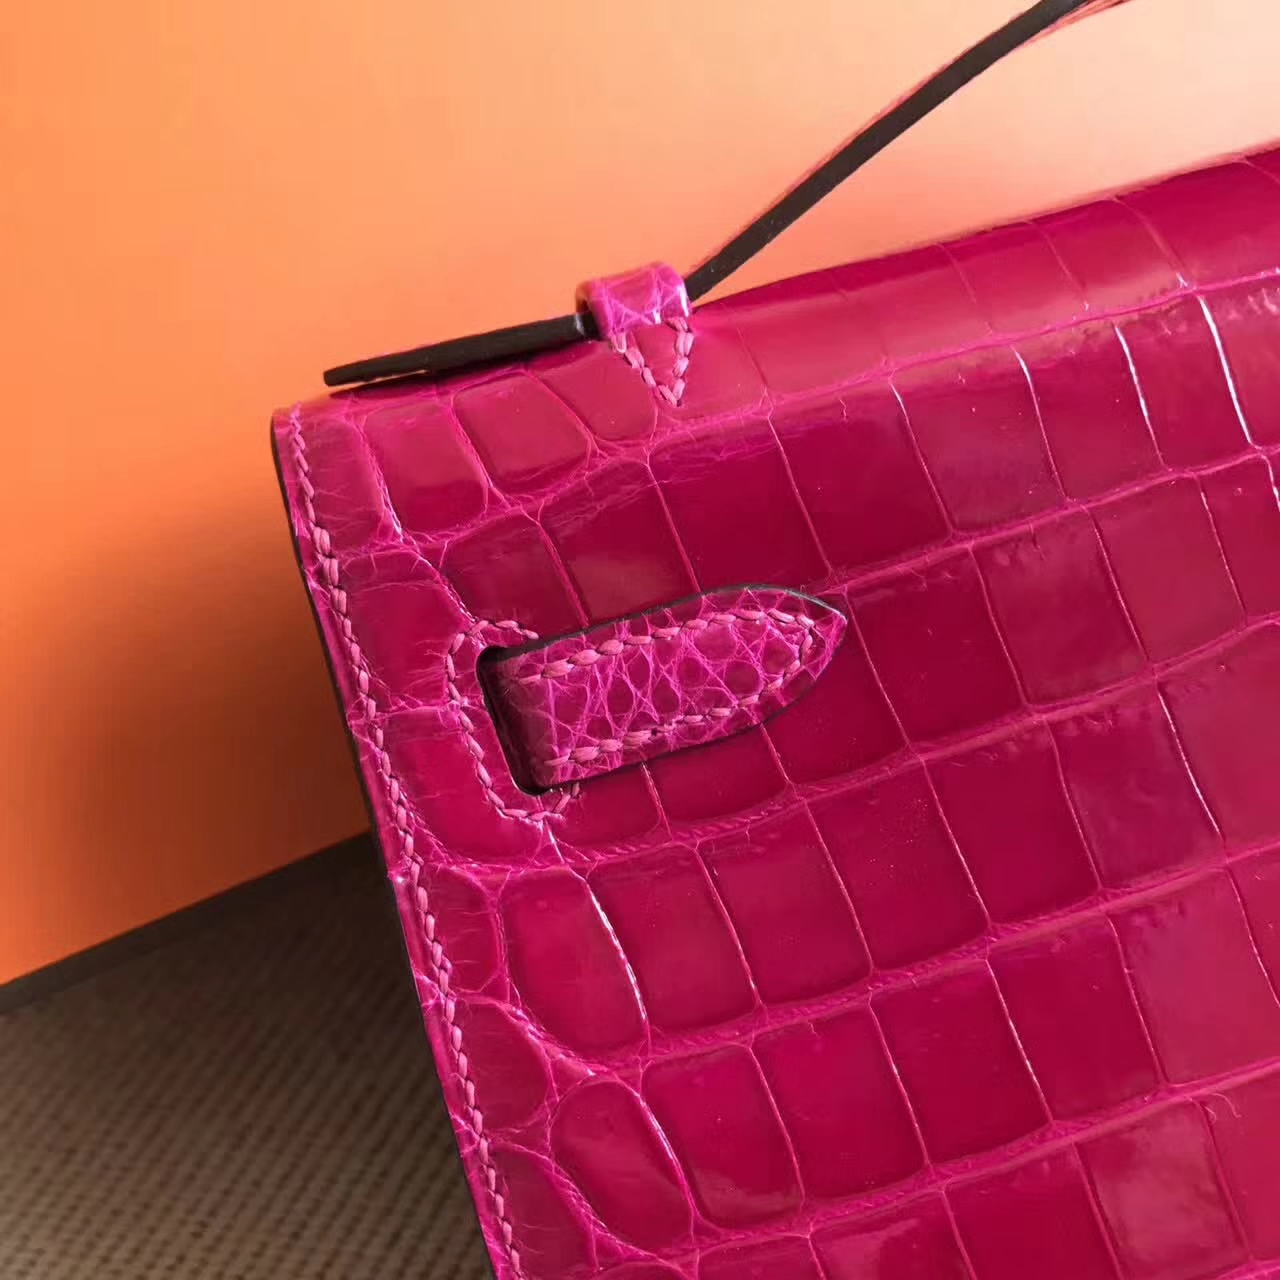 New Pretty Hermes Hot Pink Shiny Crocodile Leather Minikelly Bag22cm